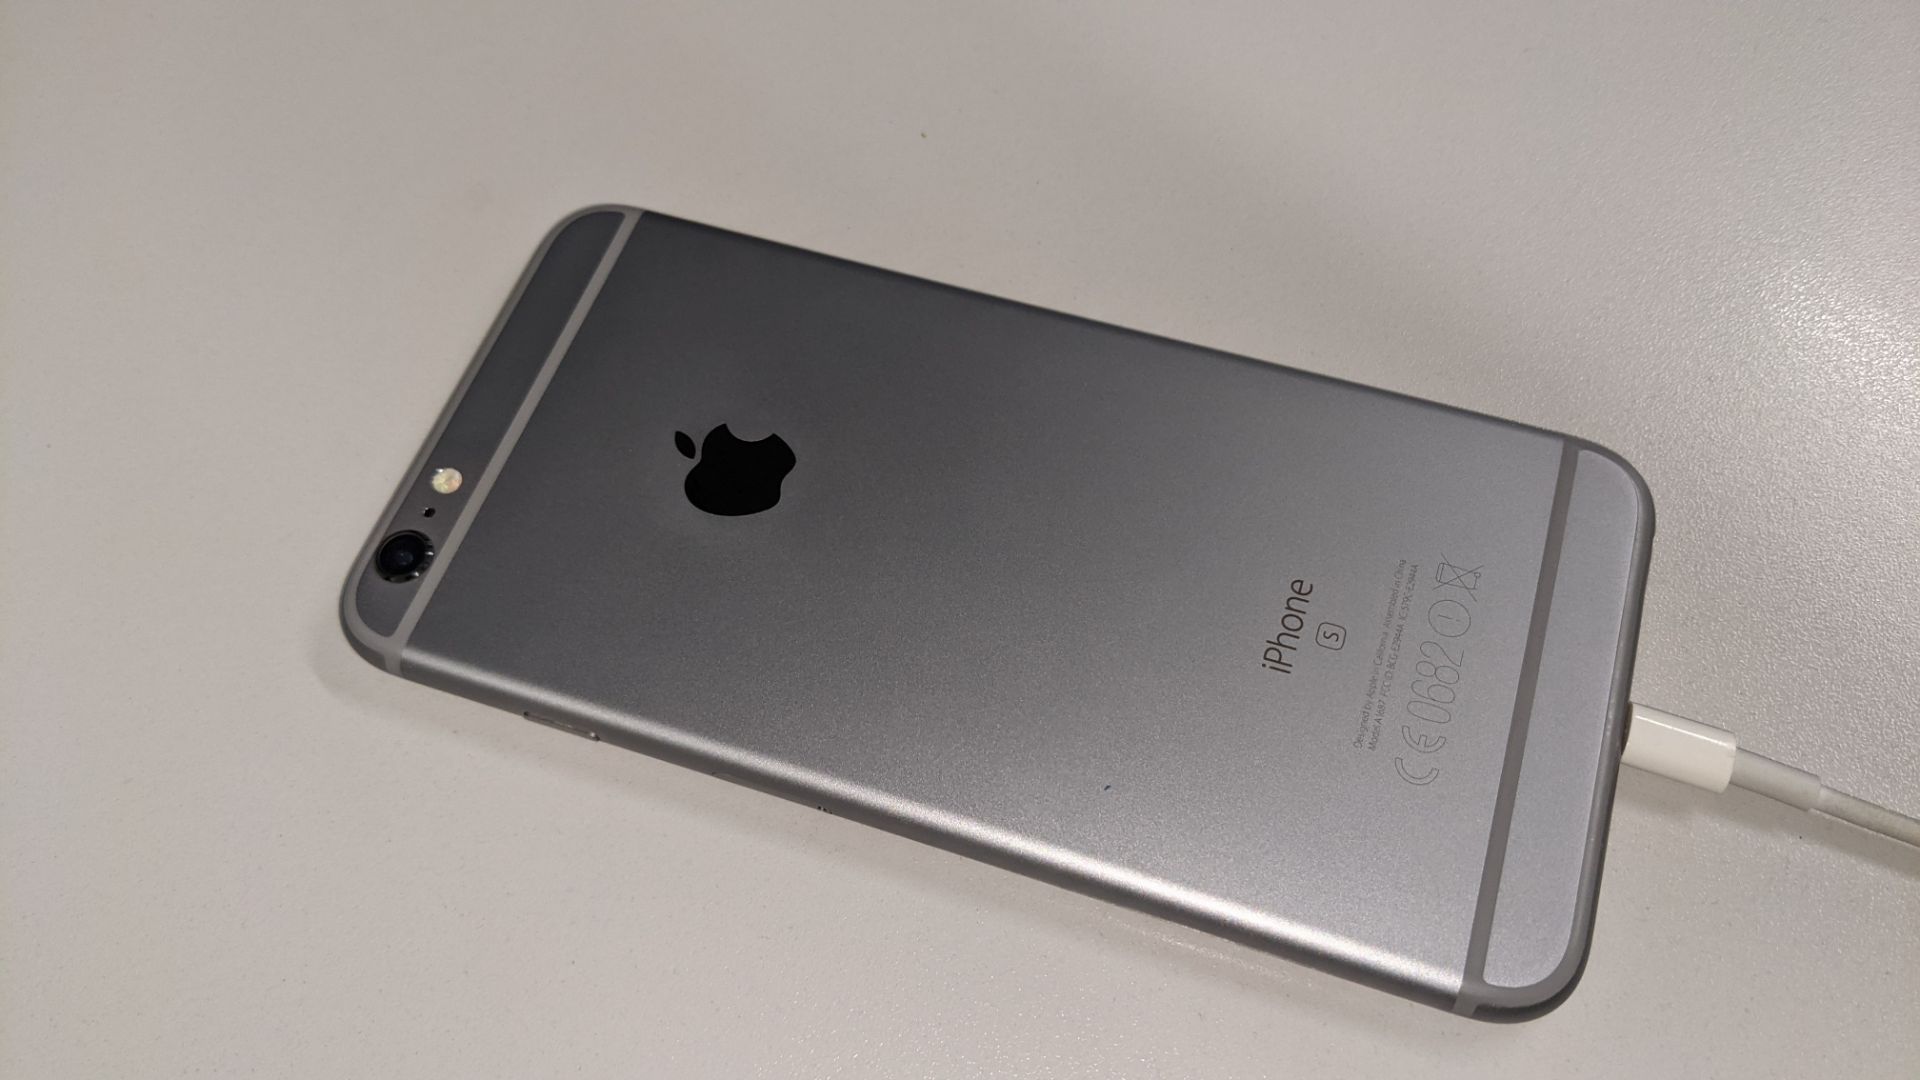 Apple iPhone 6s Plus (32 Gb) in space grey - Image 14 of 38